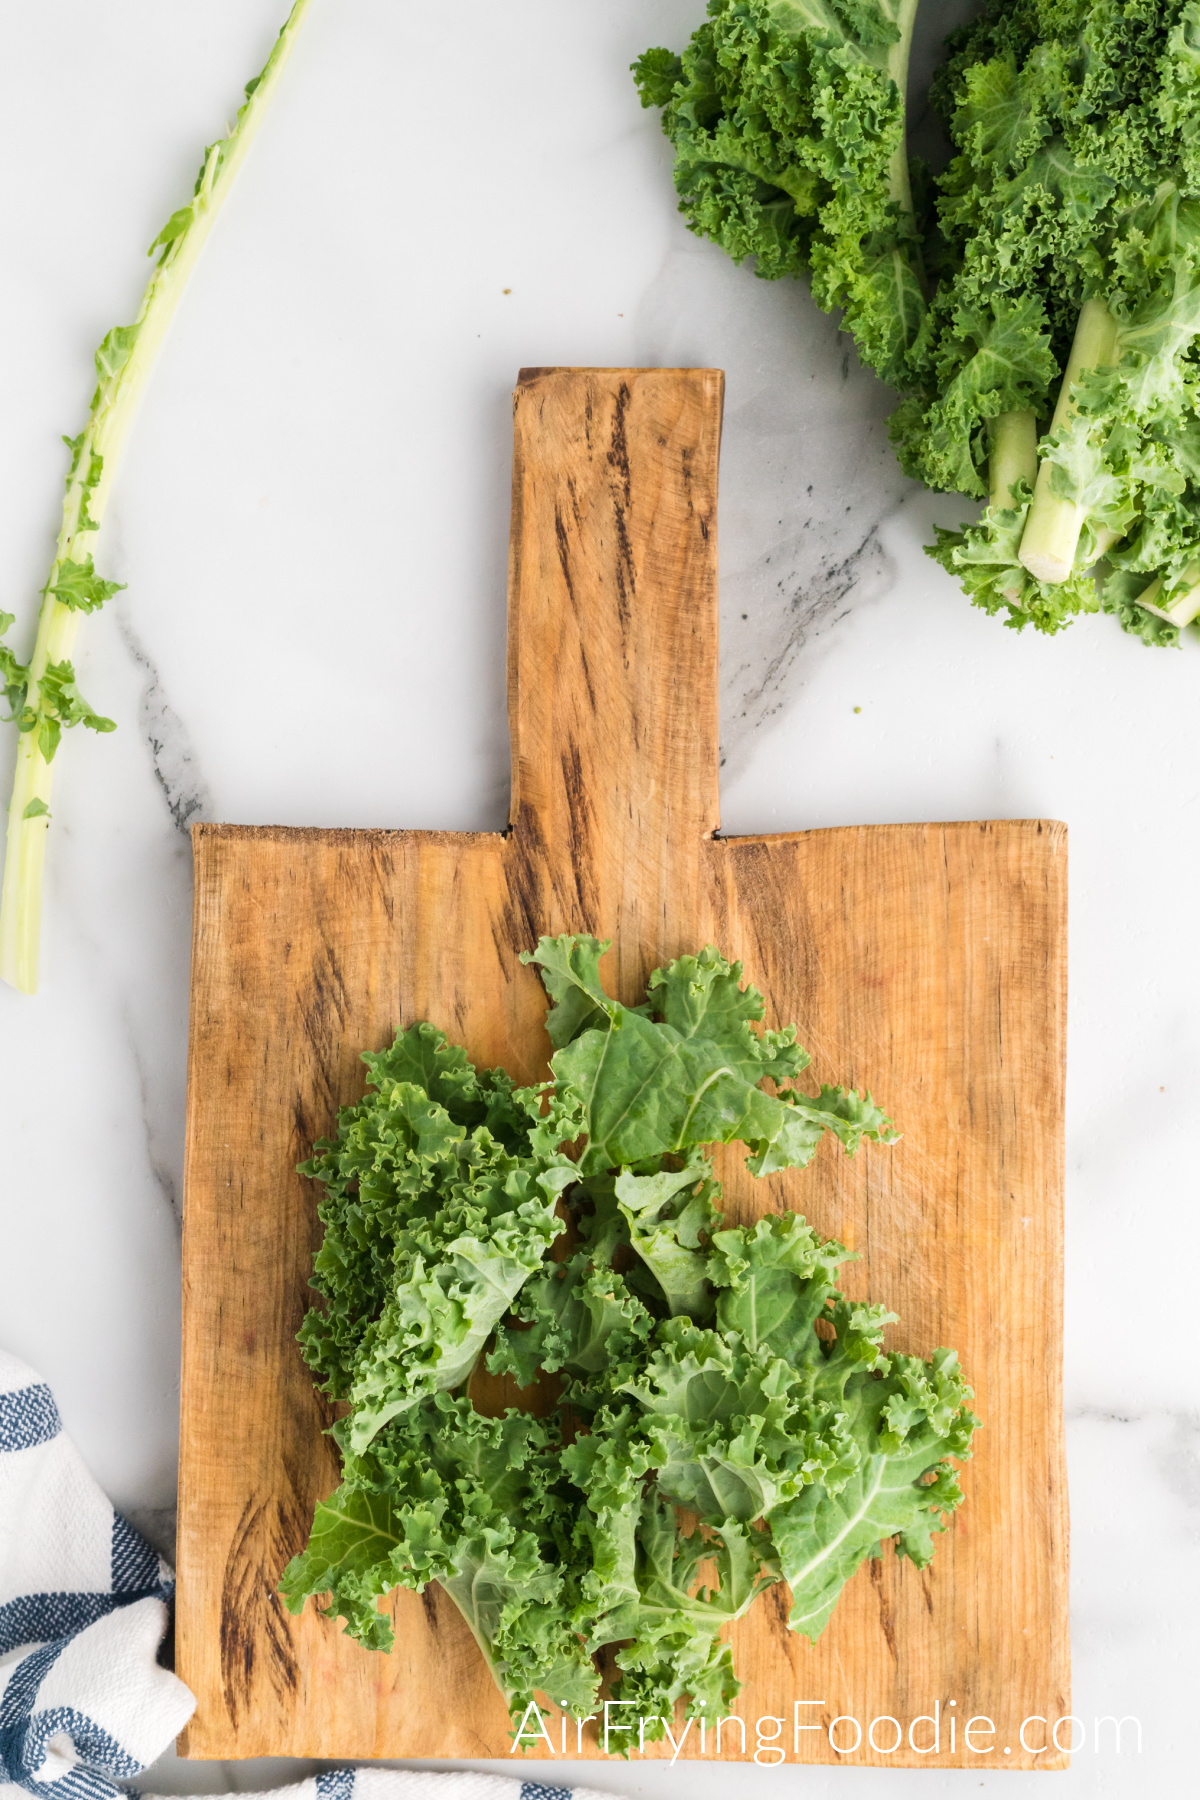 A cutting board with washed, cut-up kale leaves being prepped for cooking in the air fryer. In the top right of the picture is more kale.